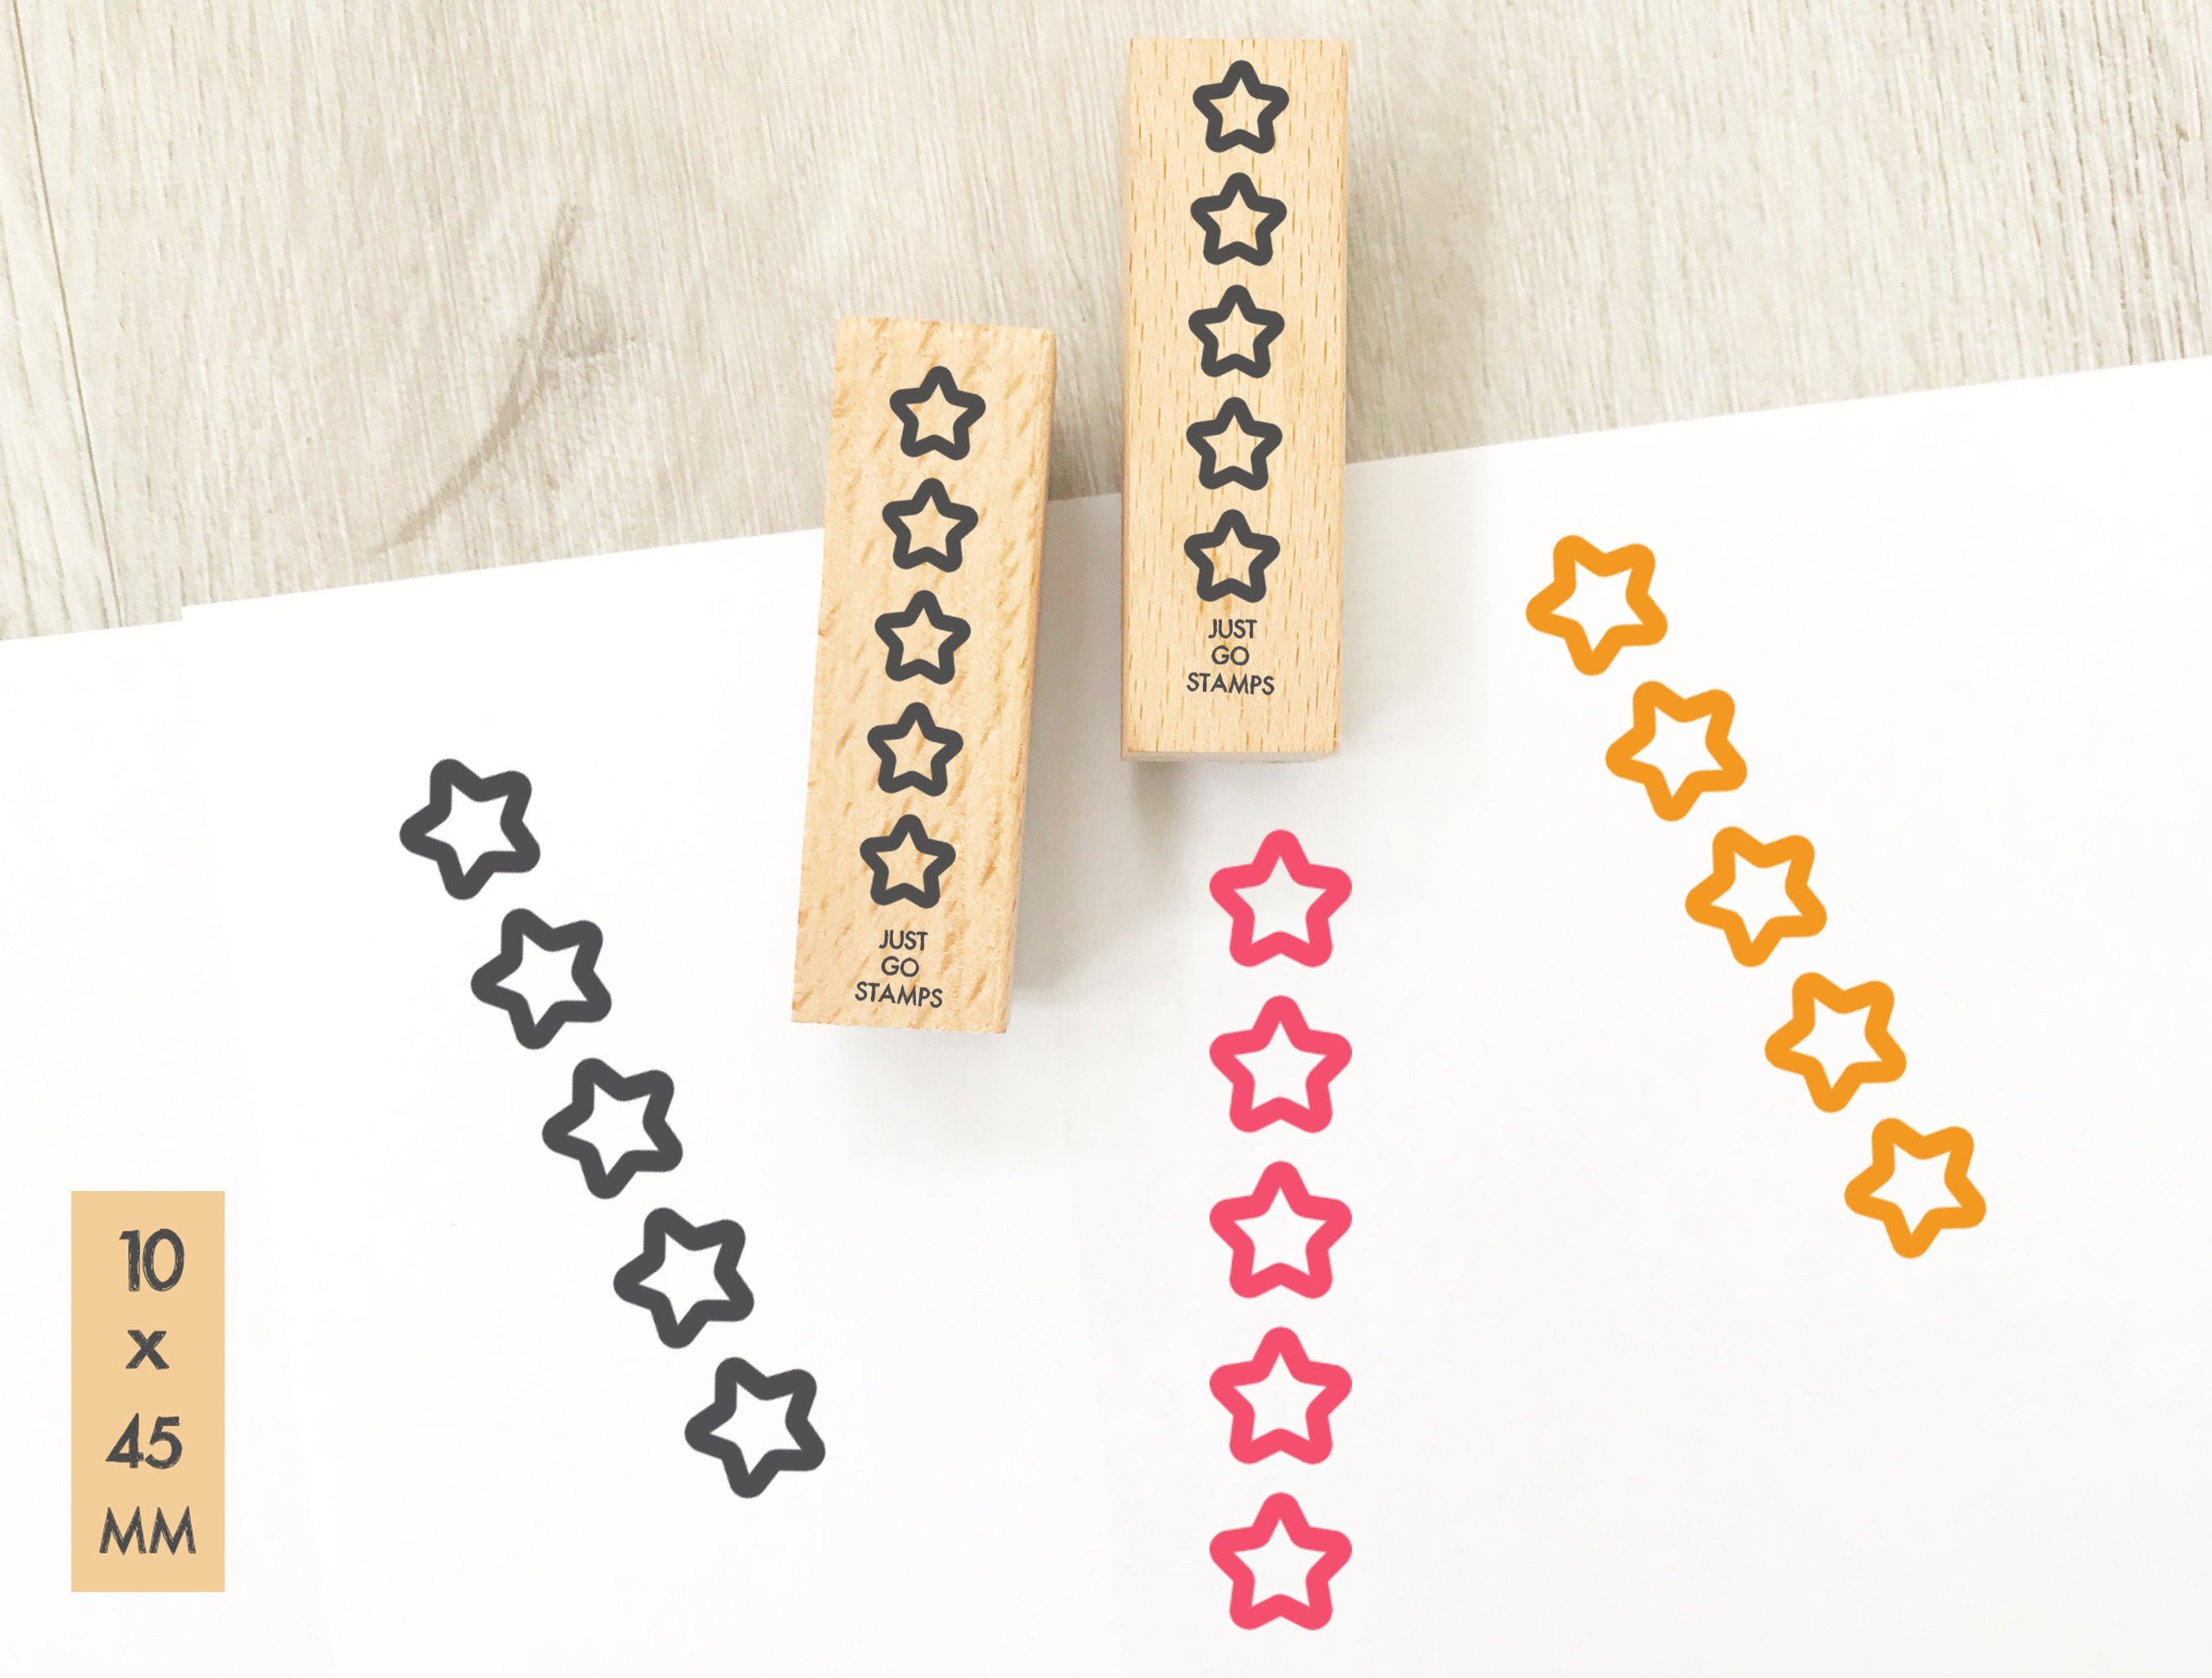 Small Star Rubber Stamp Set Tiny Shape Stamps 